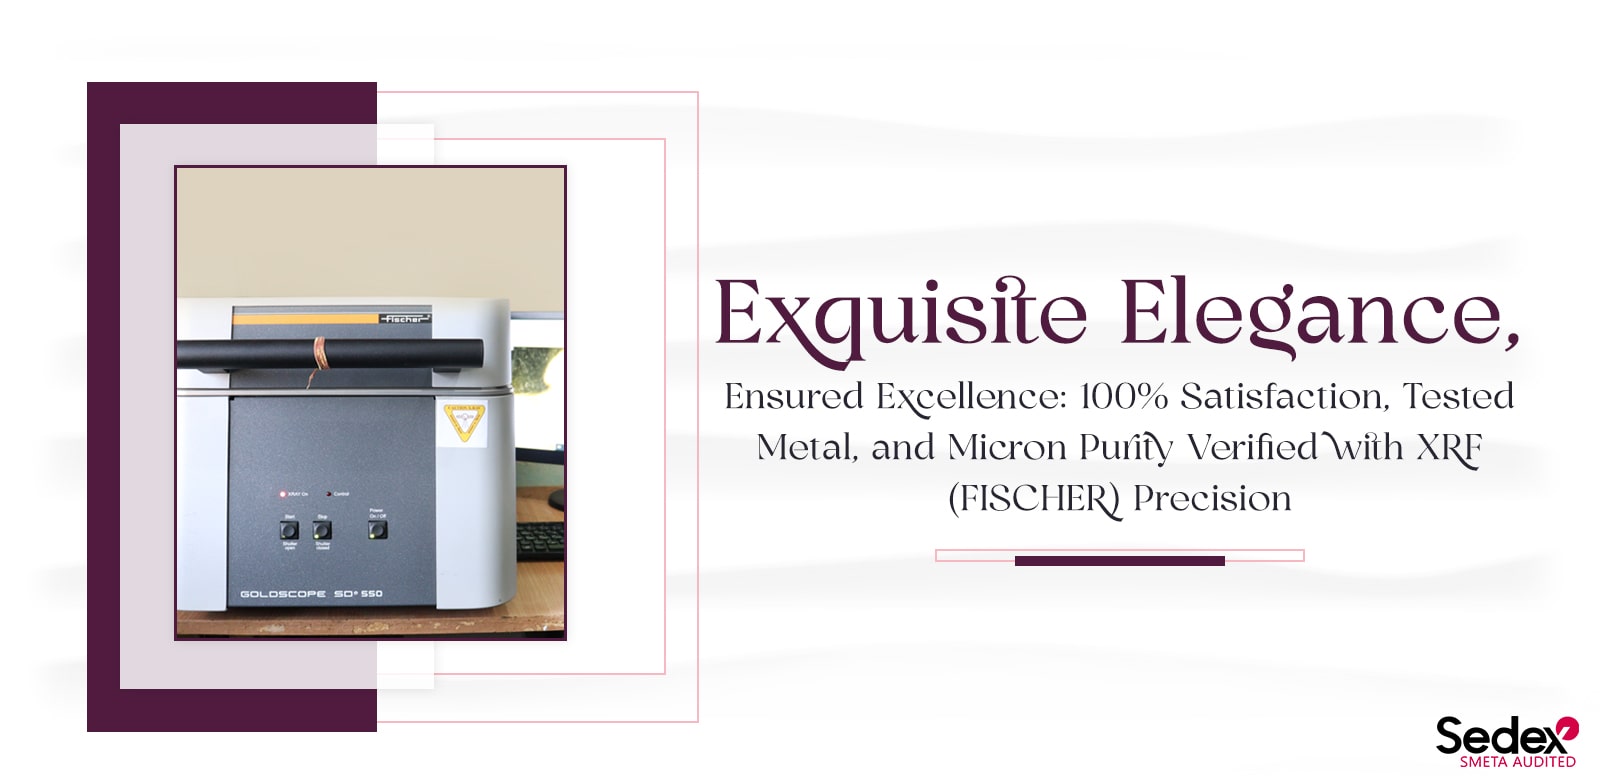 Exquisite Elegance, Ensured Excellence: 100% Satisfaction, Tested Metal, and Micron Purity Verified with XRF (FISCHER) Precision